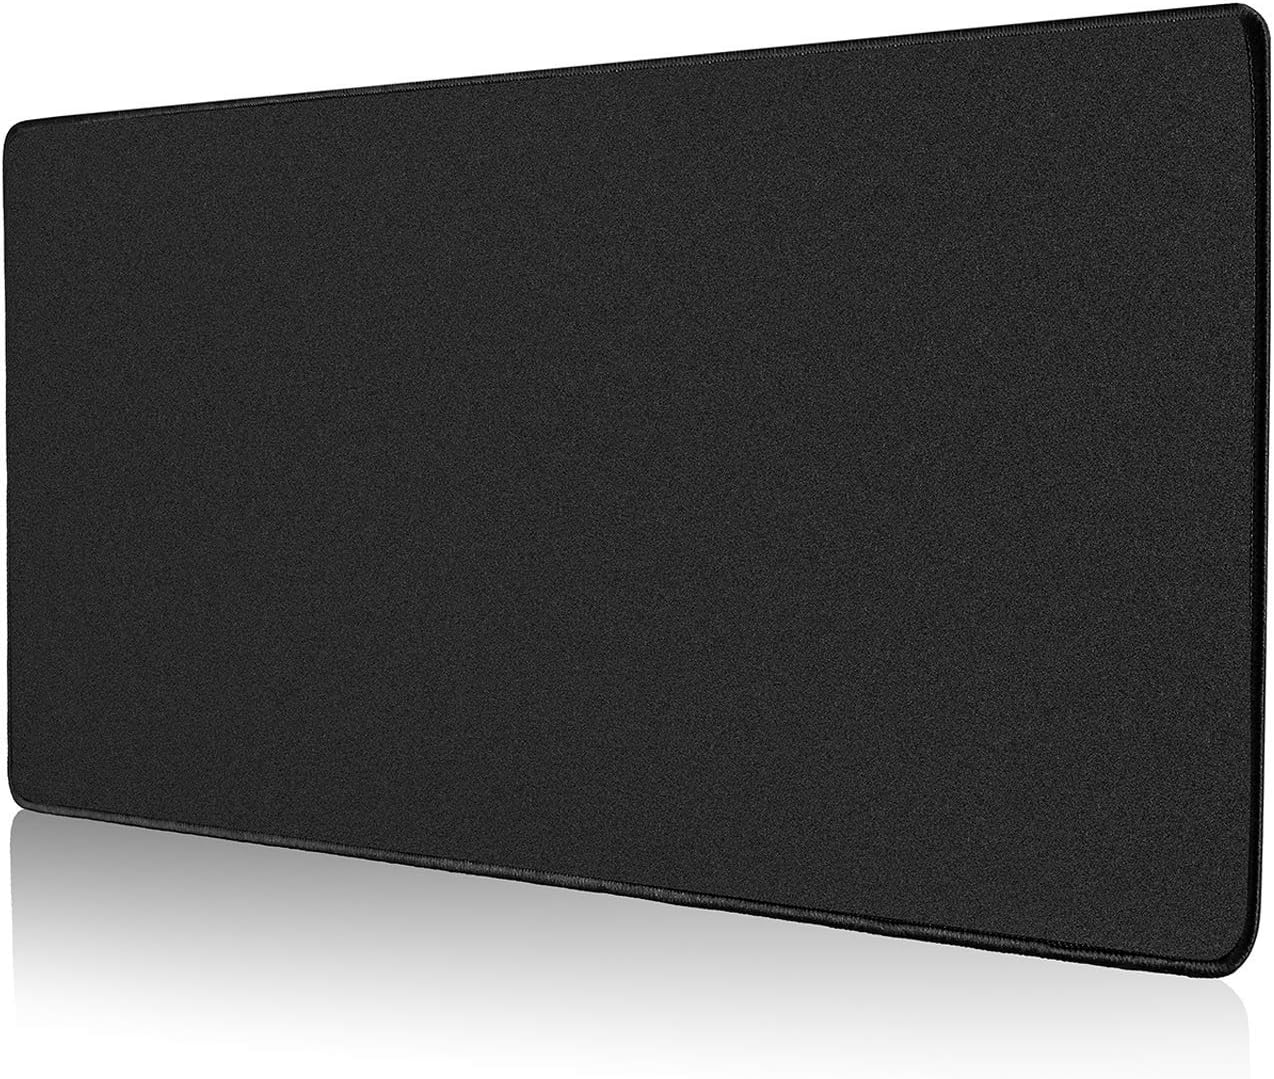 ALOANES Large Gaming Mouse Pad with Non-Slip Rubber Base,Stitched Edge,Desk mat for Laptop,Computer & PC, Wristing Pad for Gamer,Office & Home,Classic Black XL 11.81''x31.50''x0.12''